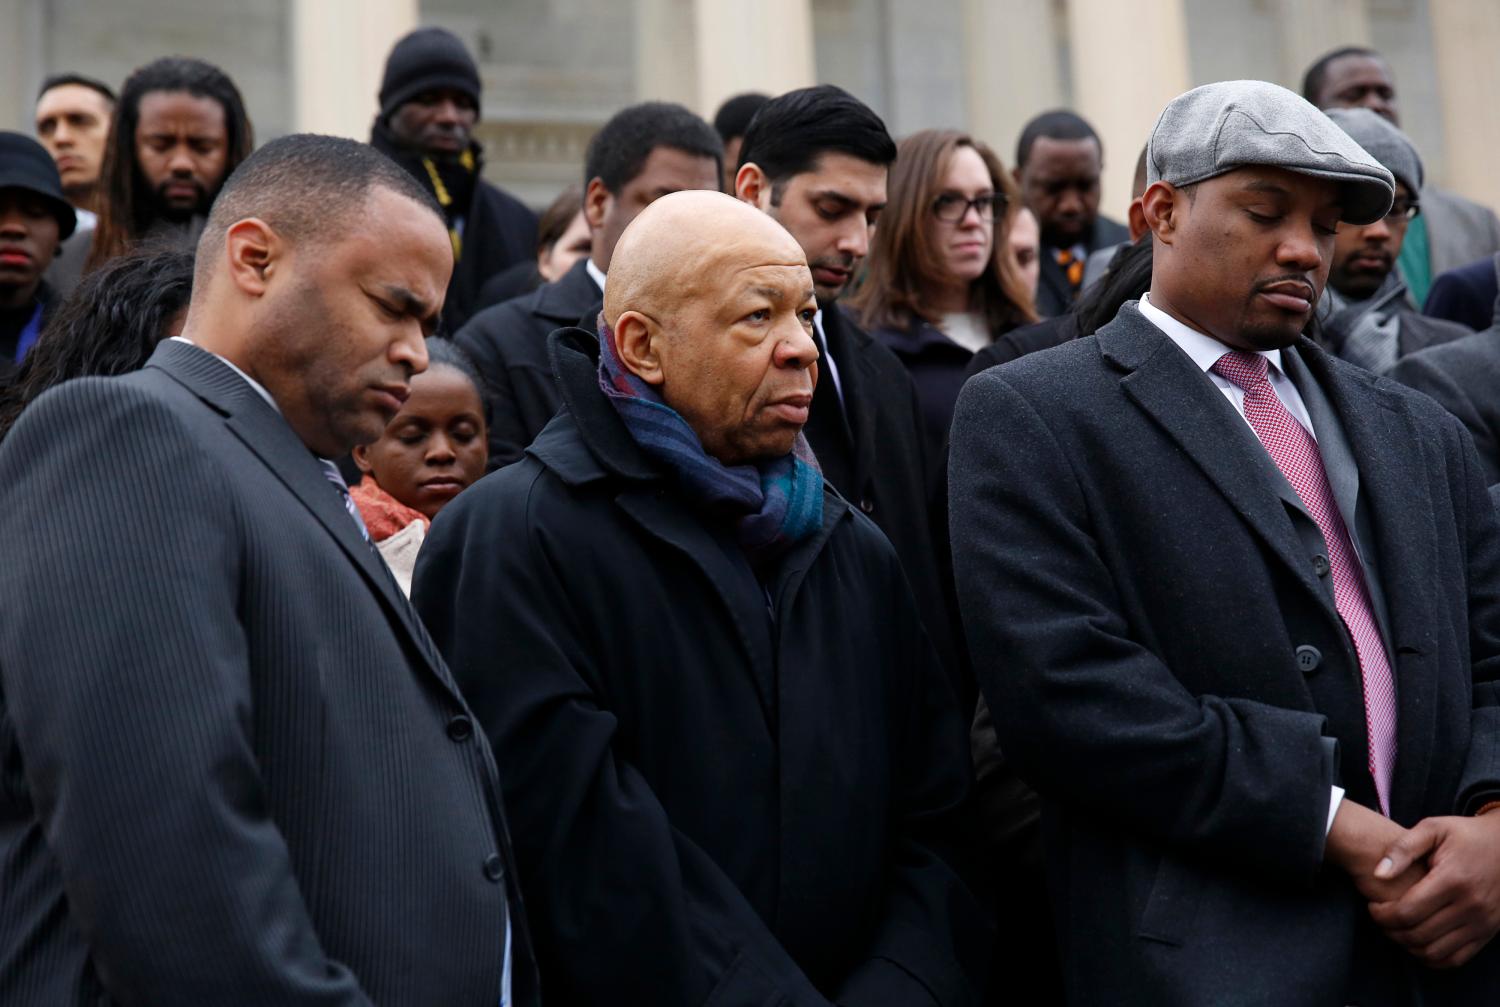 African-American Congressional staffers and representatives, including Representative Mark Veasey (D-TX) (L) and Elijah Cummings (D-MD) (C) stage a walk out on the steps of the House of Representatives at the U.S. Capitol to protest the deaths of Michael Brown and Eric Garner, in Washington December 11, 2014. REUTERS/Gary Cameron   (UNITED STATES - Tags: CRIME LAW POLITICS CIVIL UNREST) - GM1EACC0G0P01